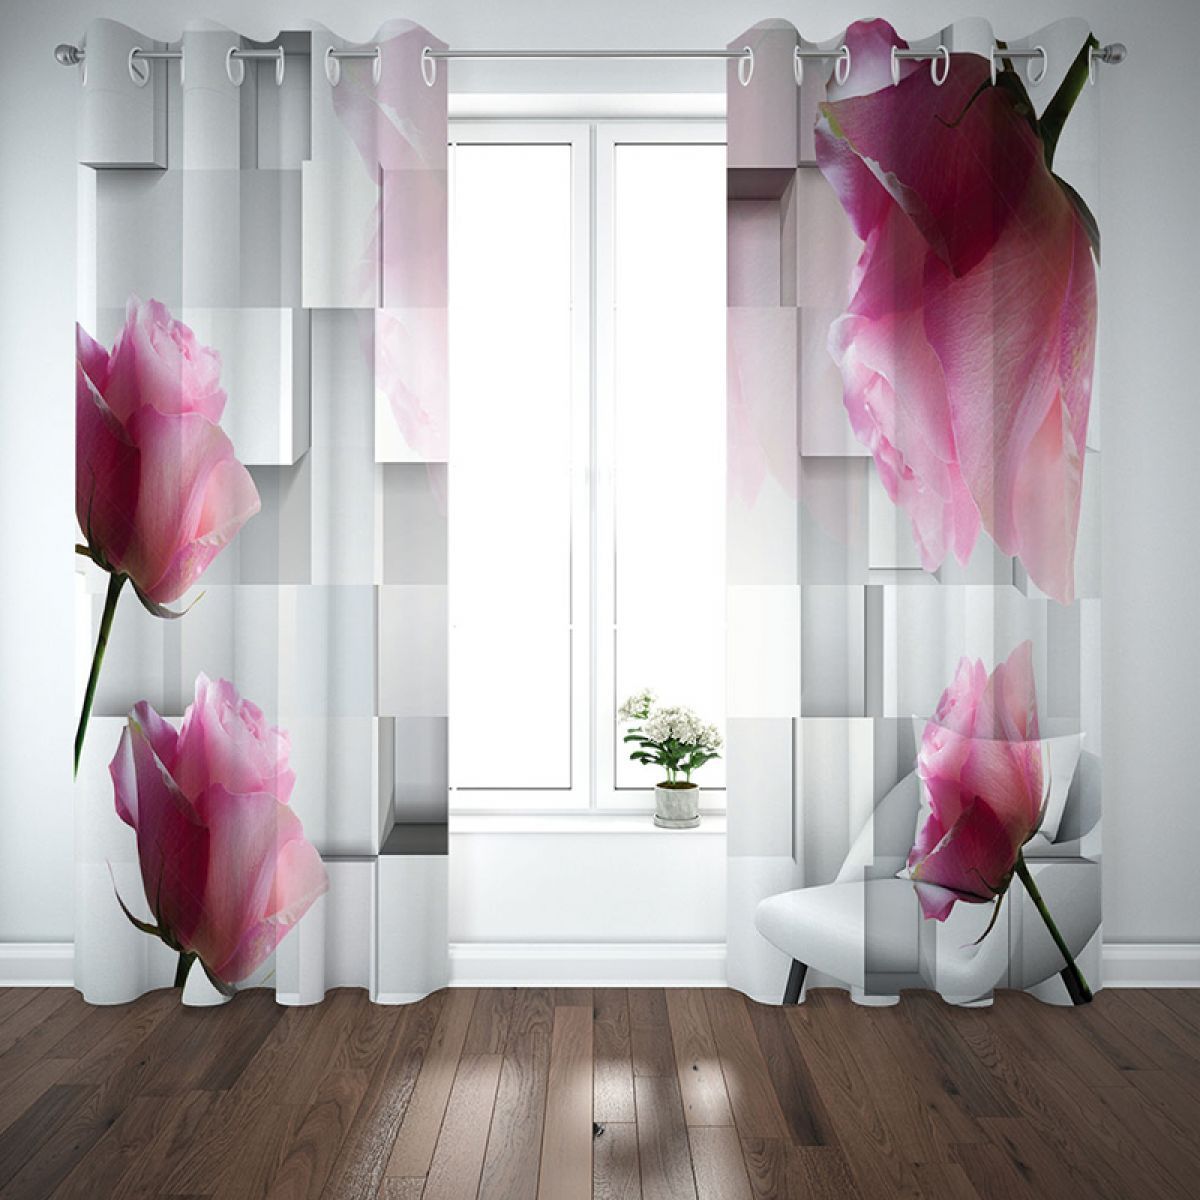 modern 3d geometric and roses printed window curtain home decor 6121